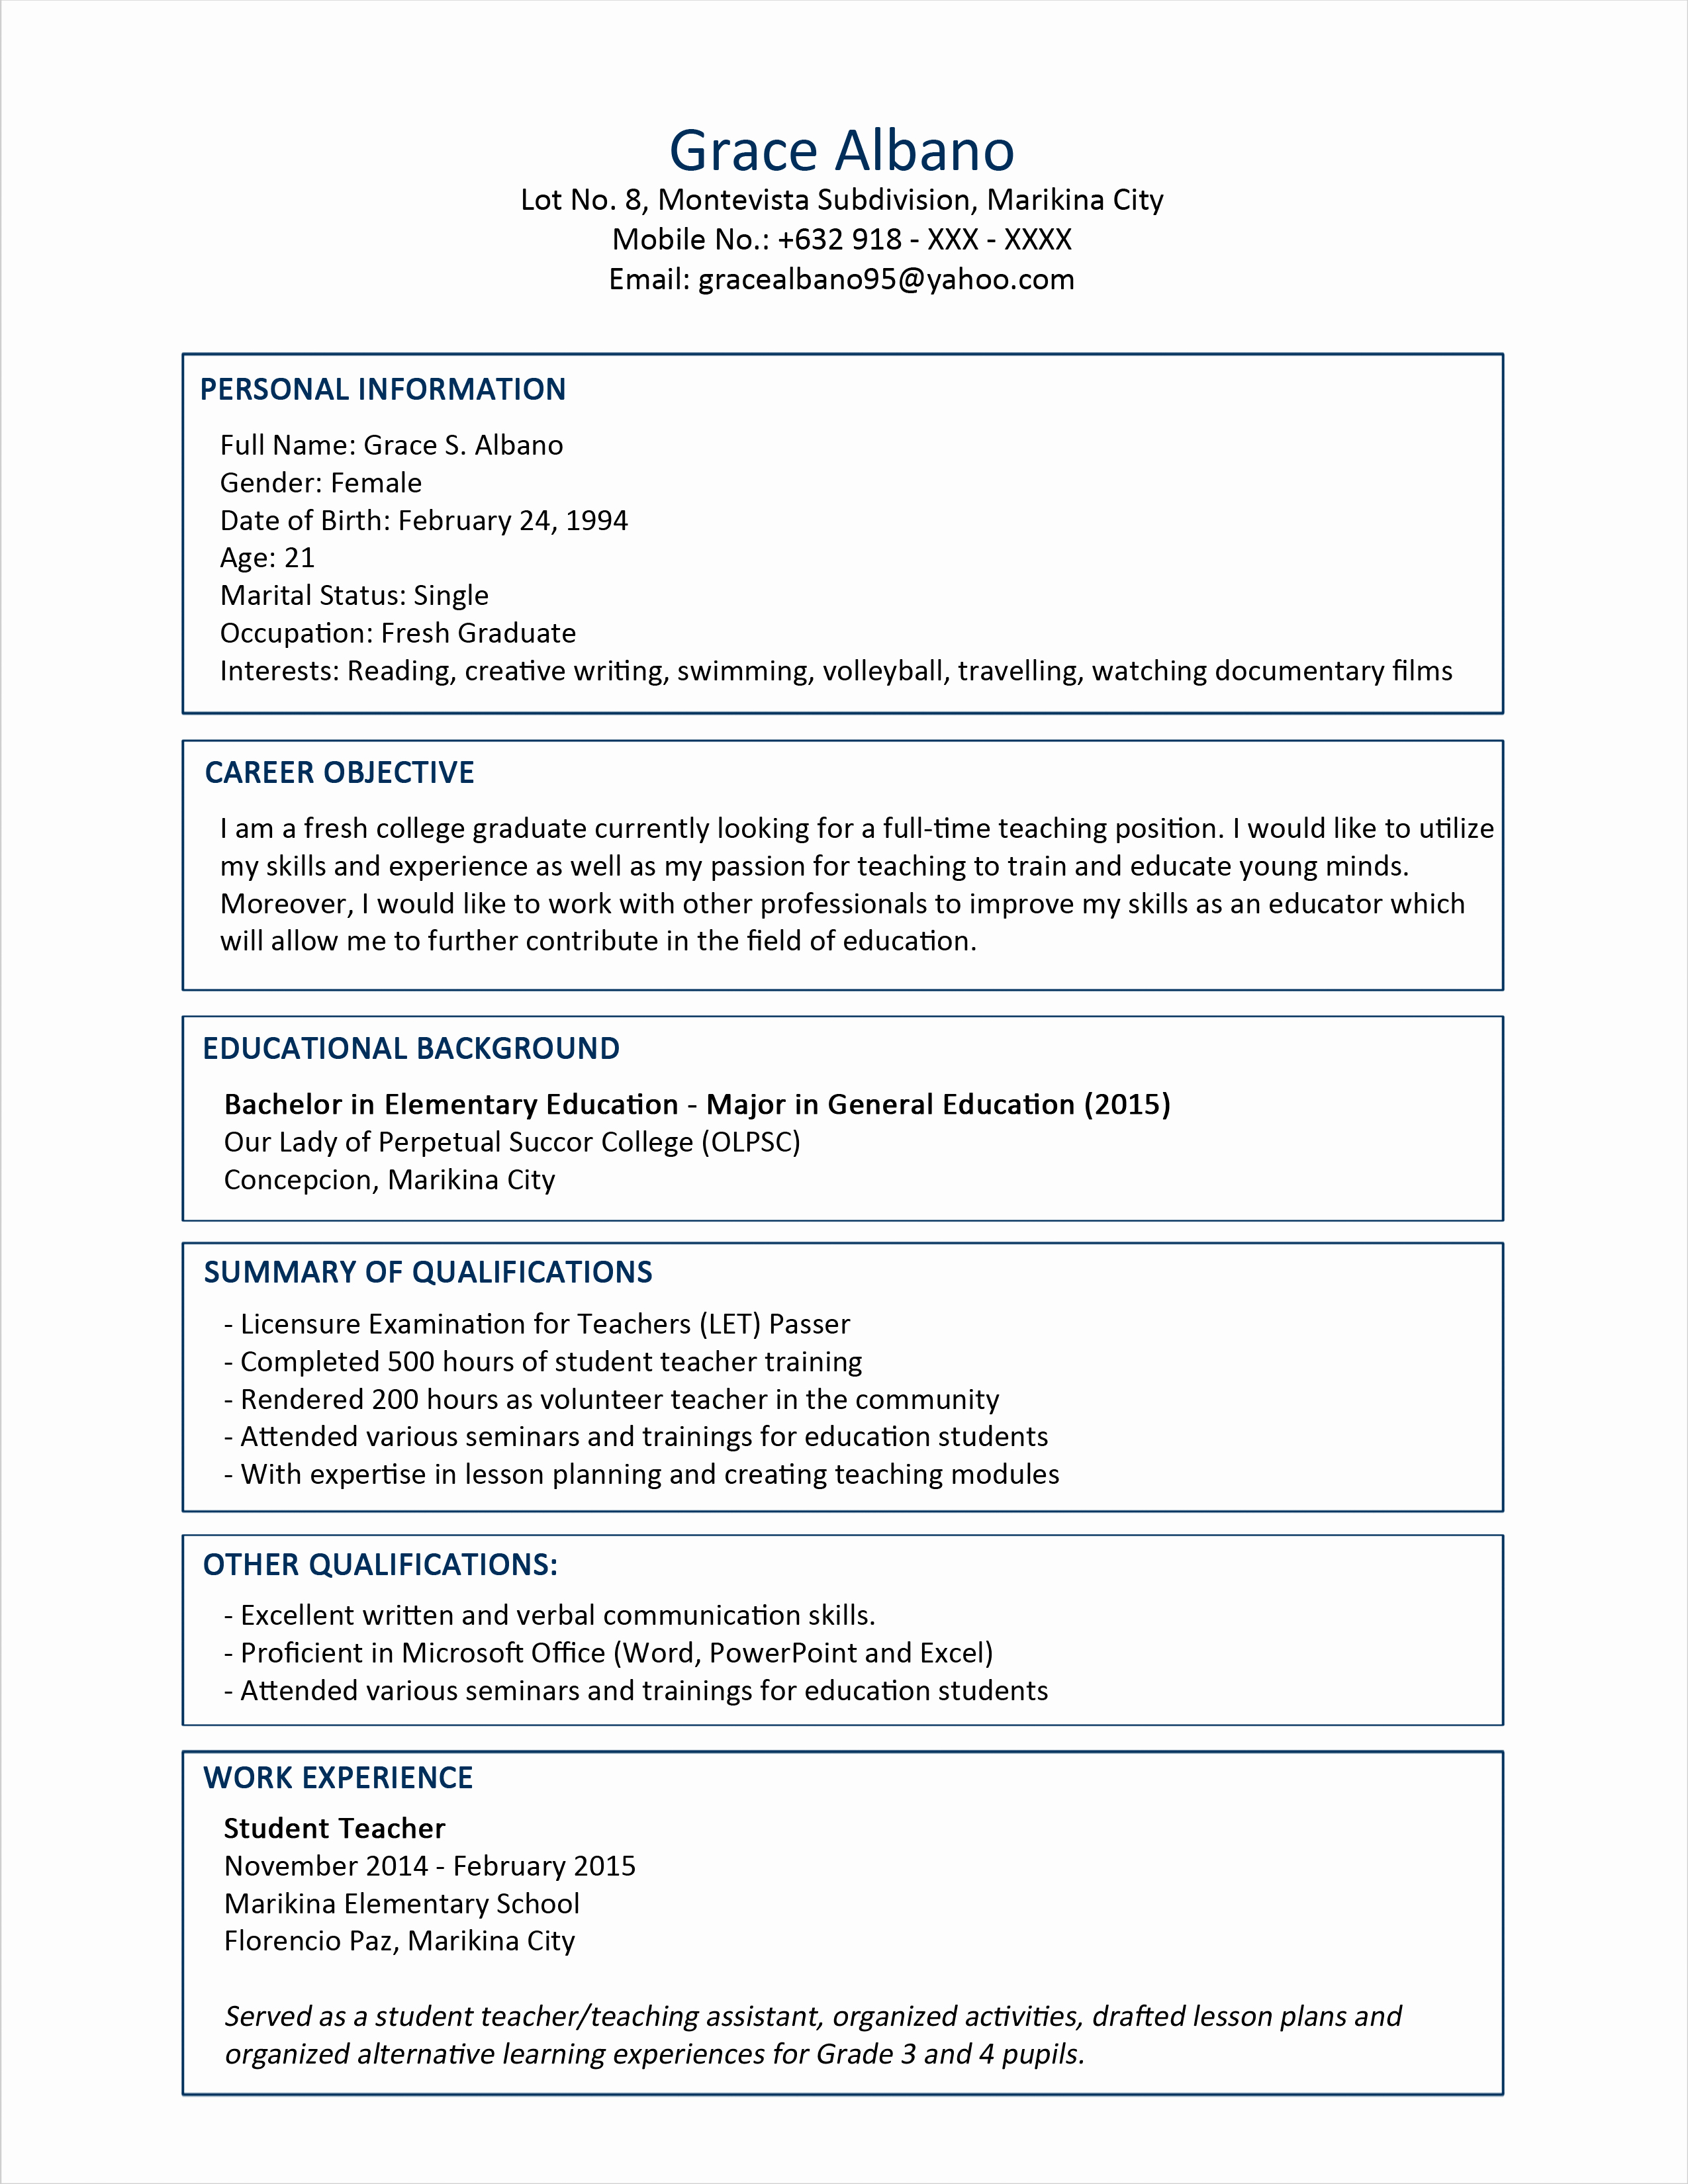 Resume Examples In Word format Elegant Sample Resume format for Fresh Graduates Two Page format